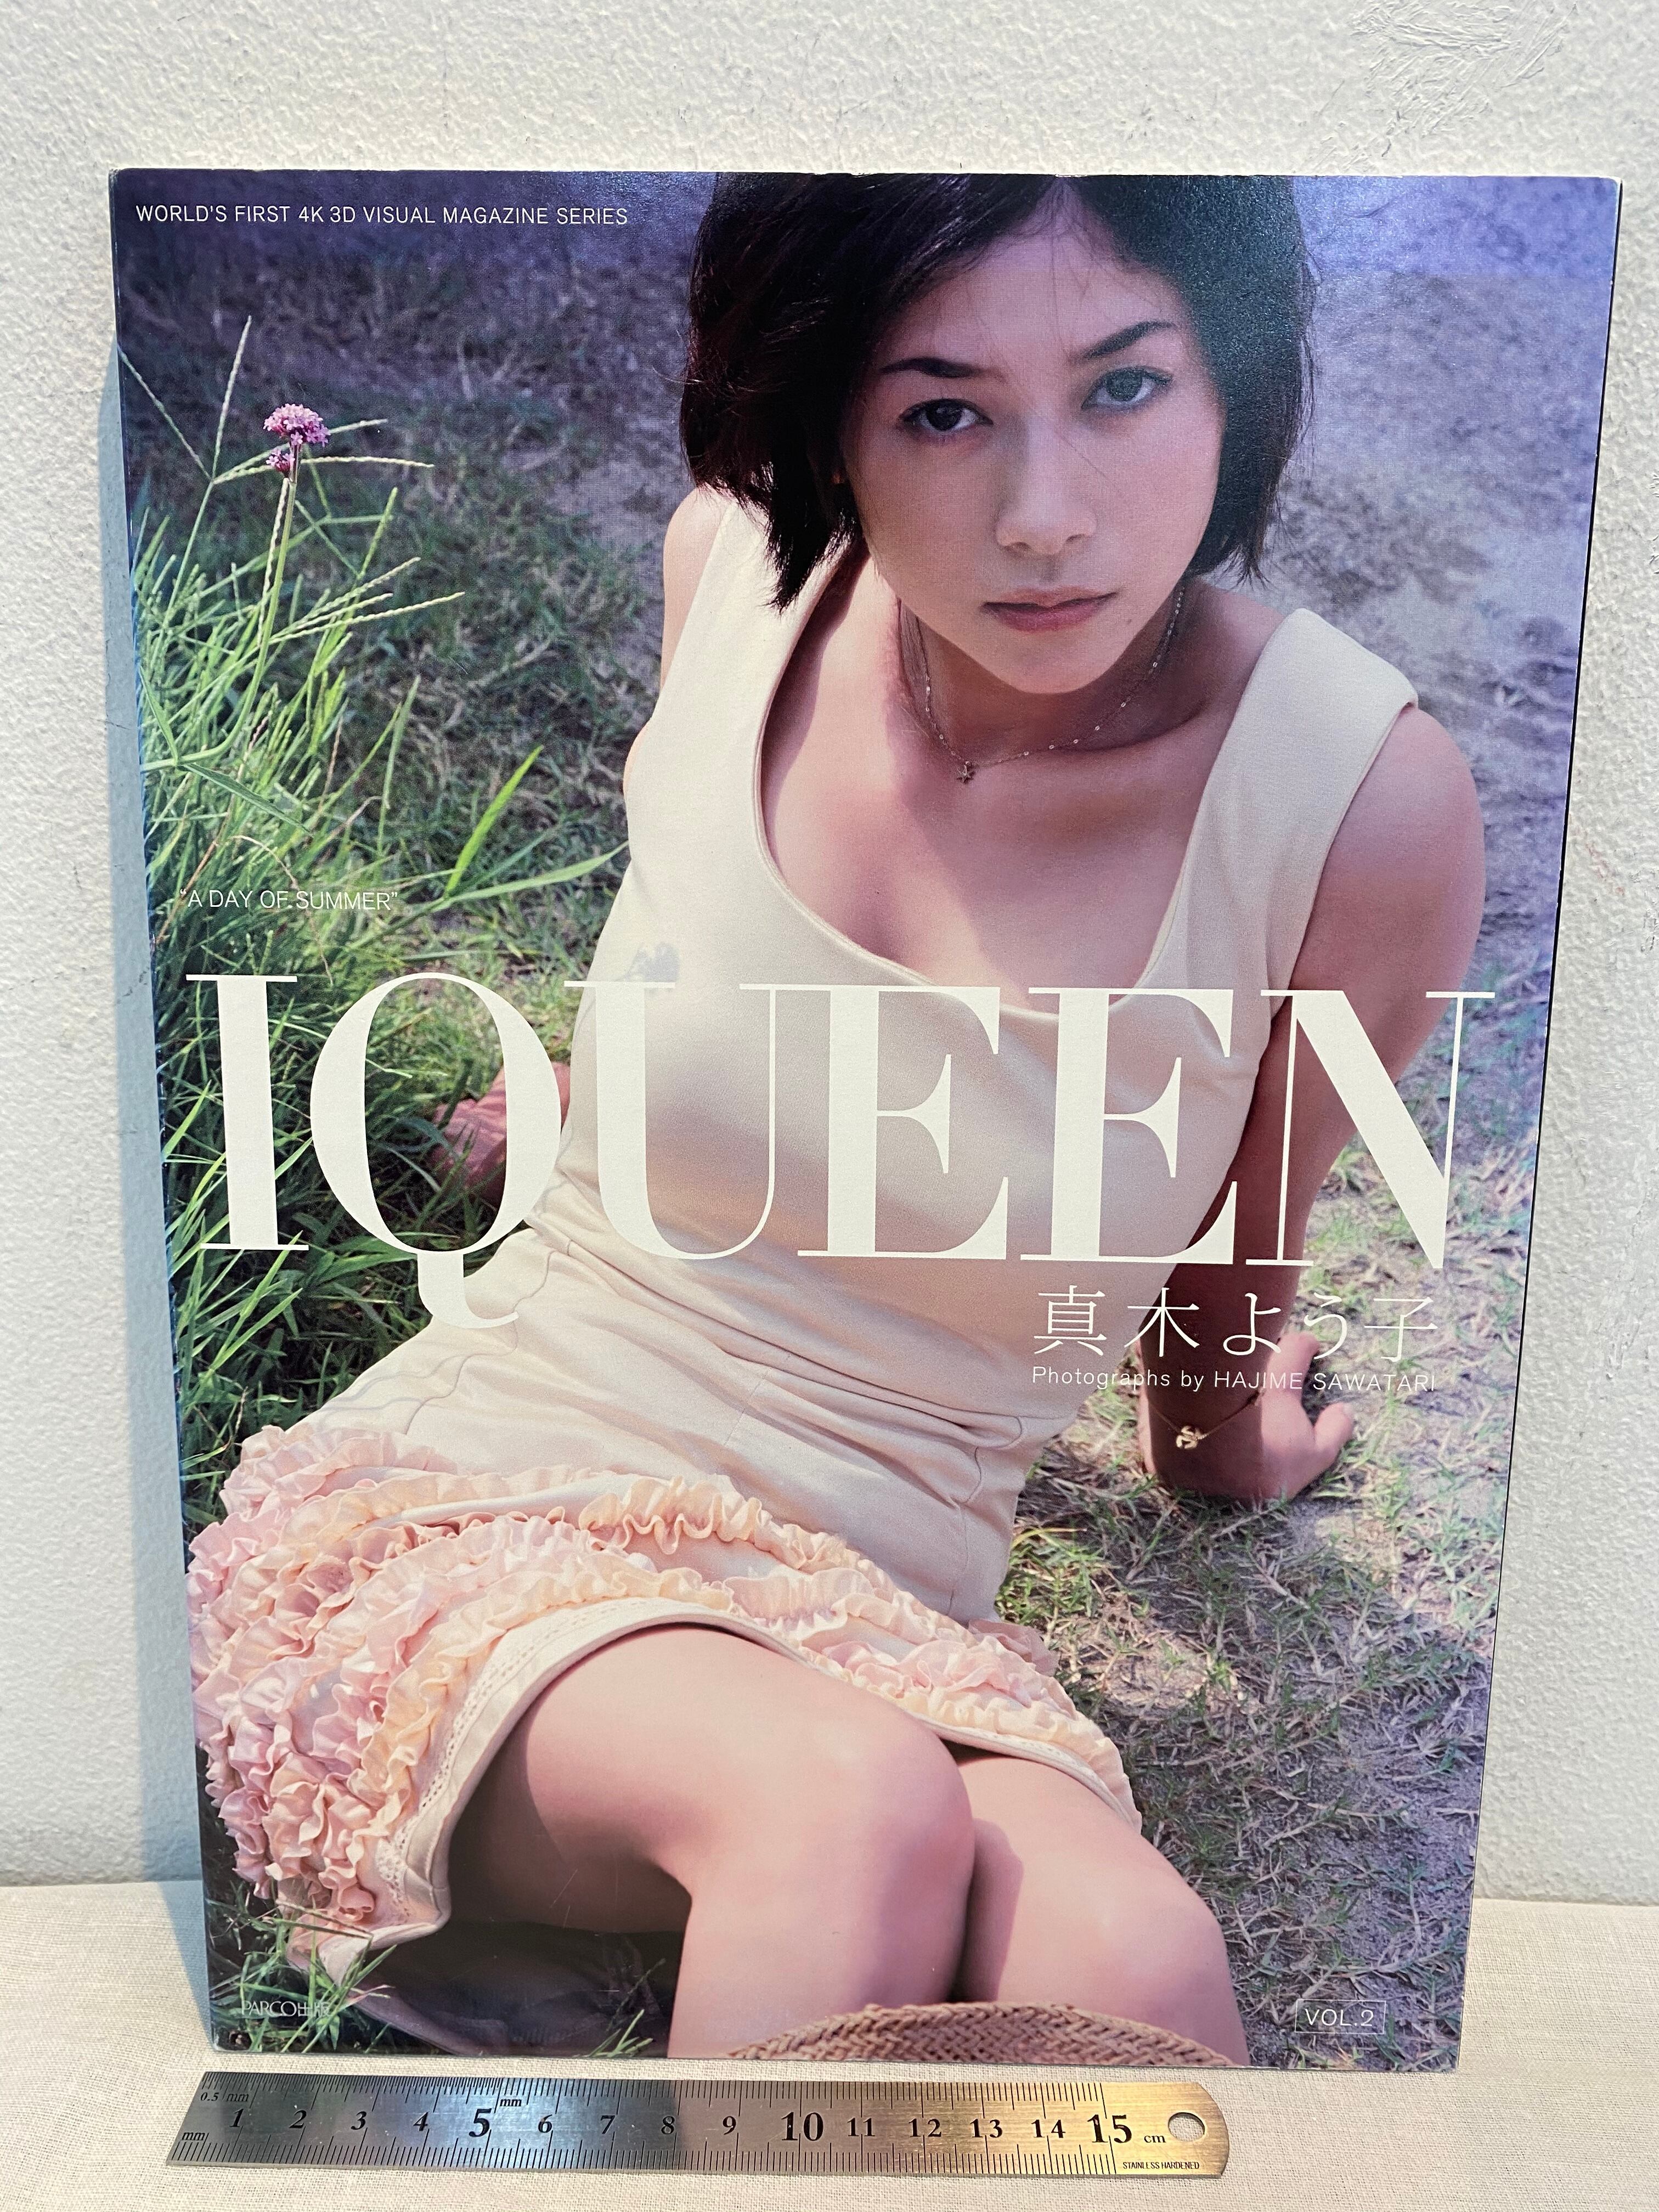 IQUEEN VOL.2 真木よう子写真集　藤代冥砂撮影 | zbooks powered by BASE